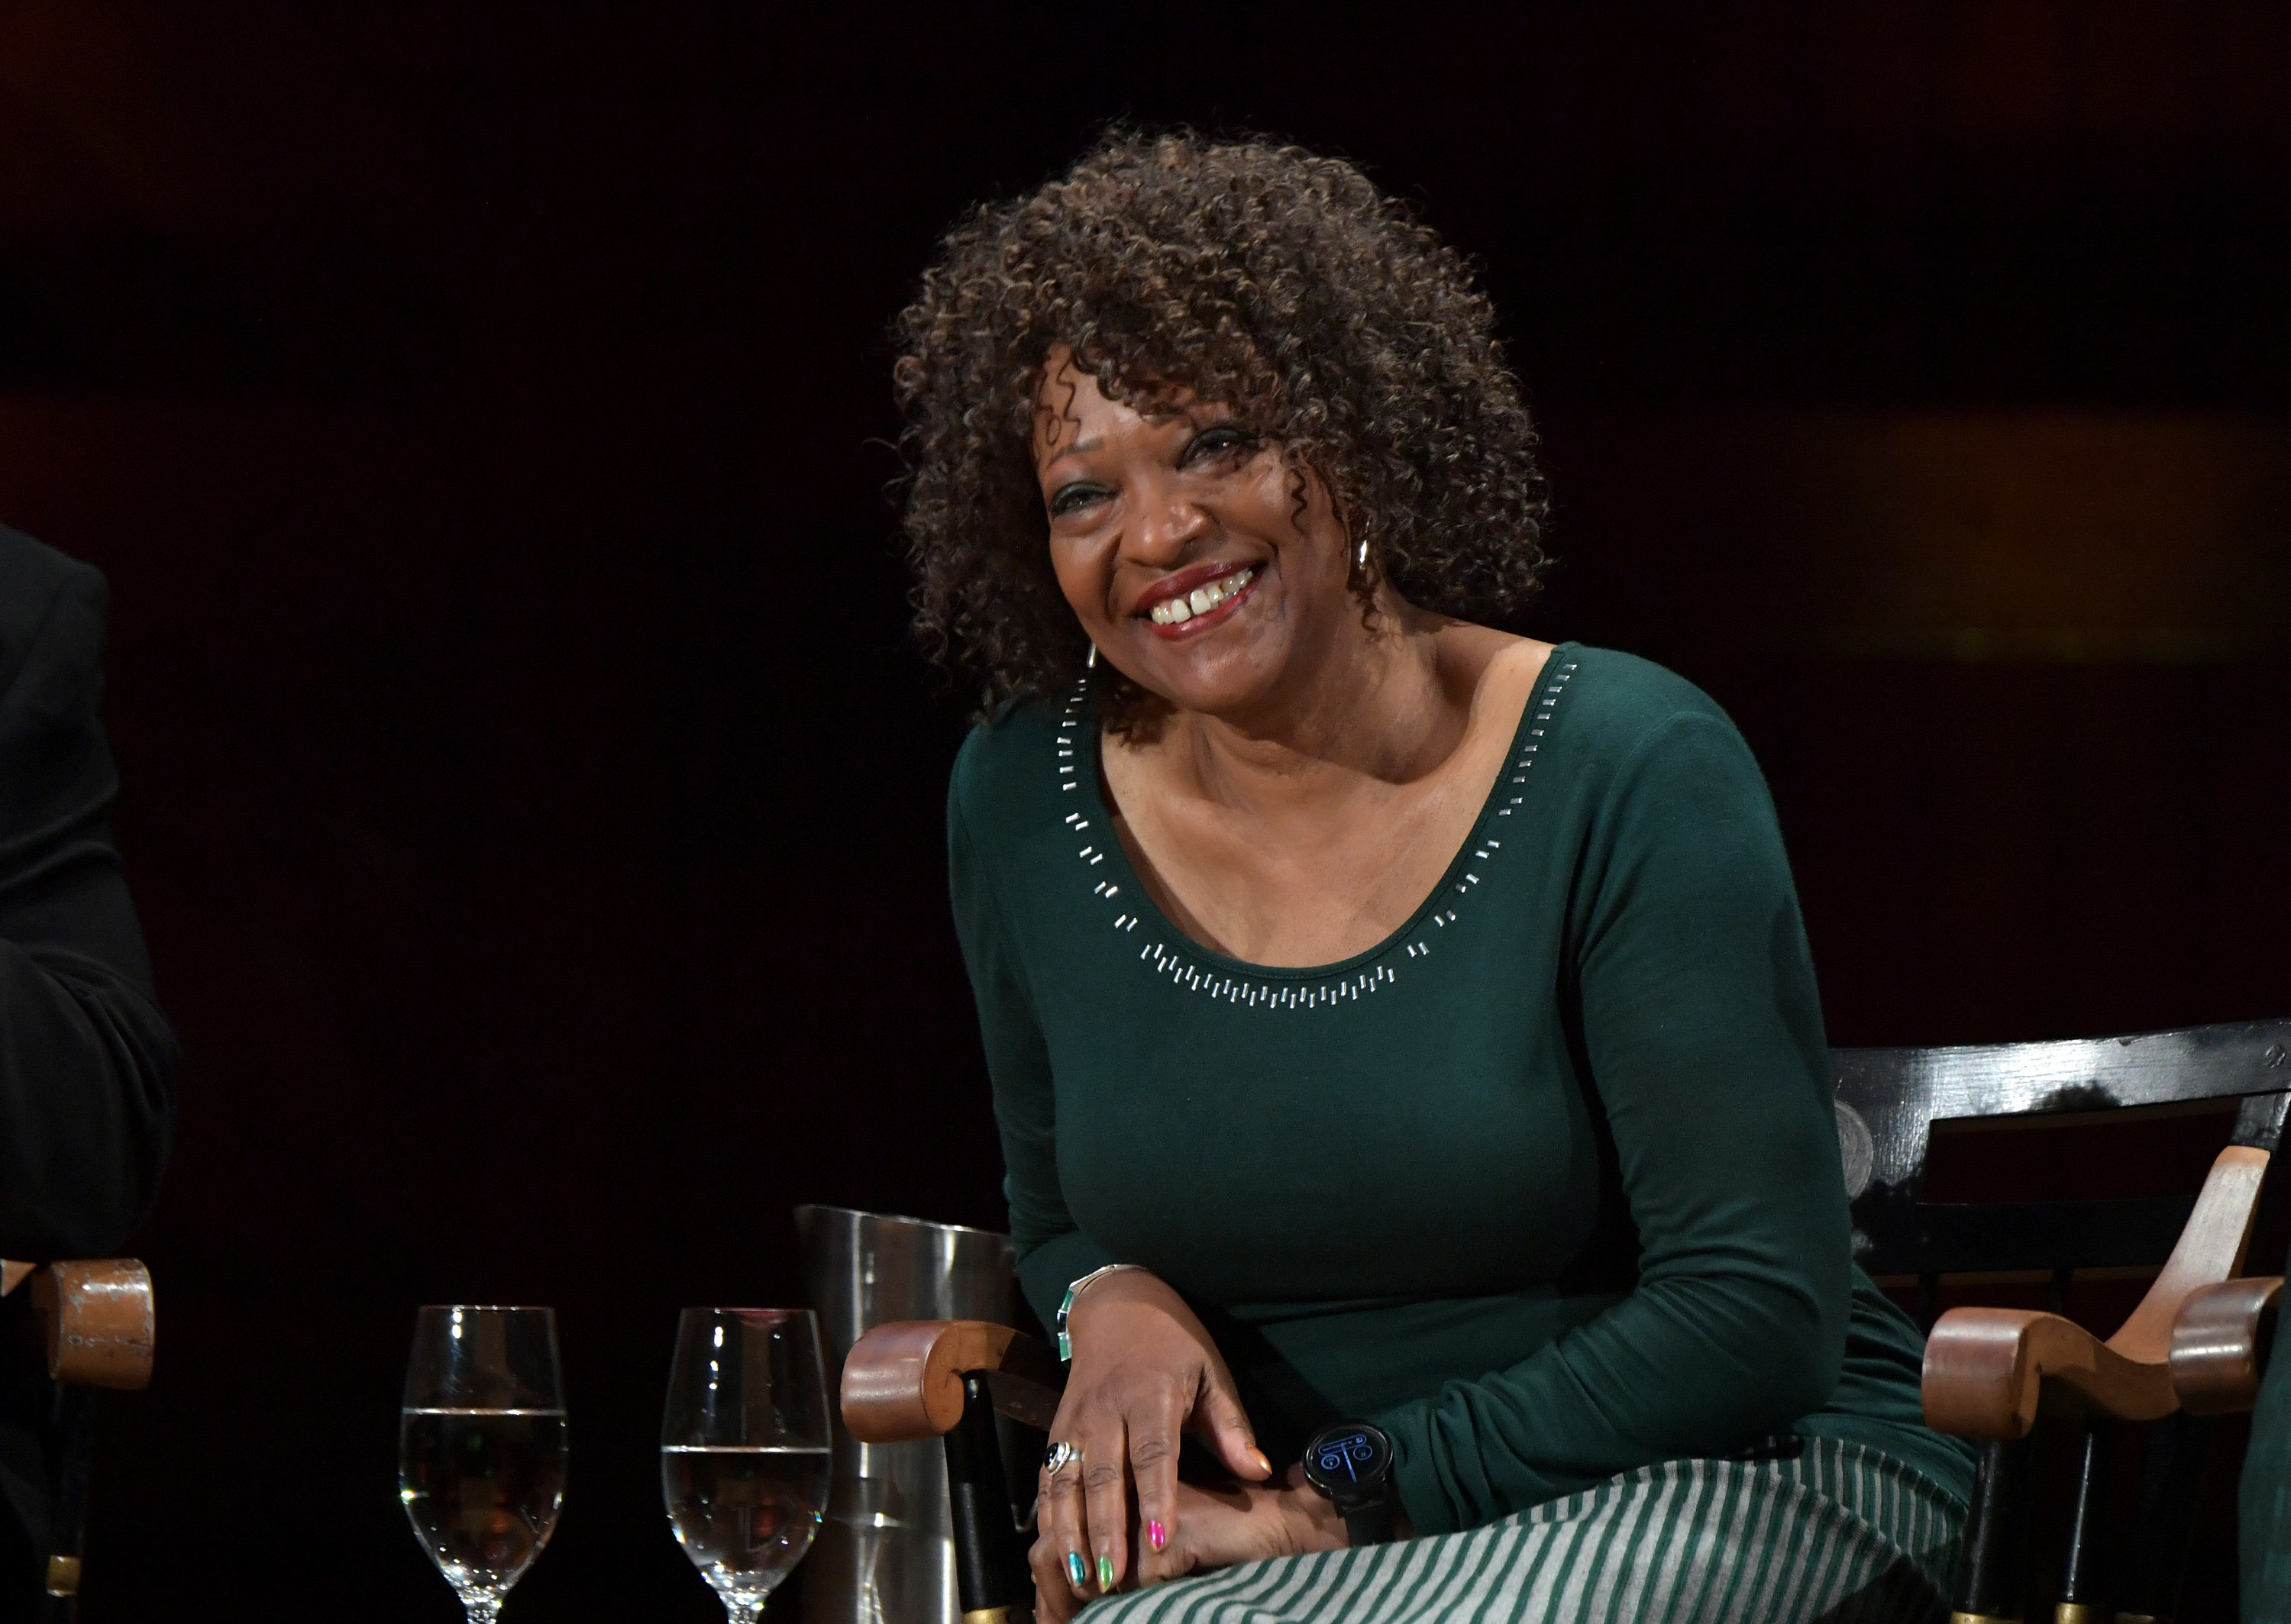 Rita Dove sits on stage at the 2019 Hutchins Center Honors W.E.B. Du Bois Medal Ceremony at Harvard University in 2019